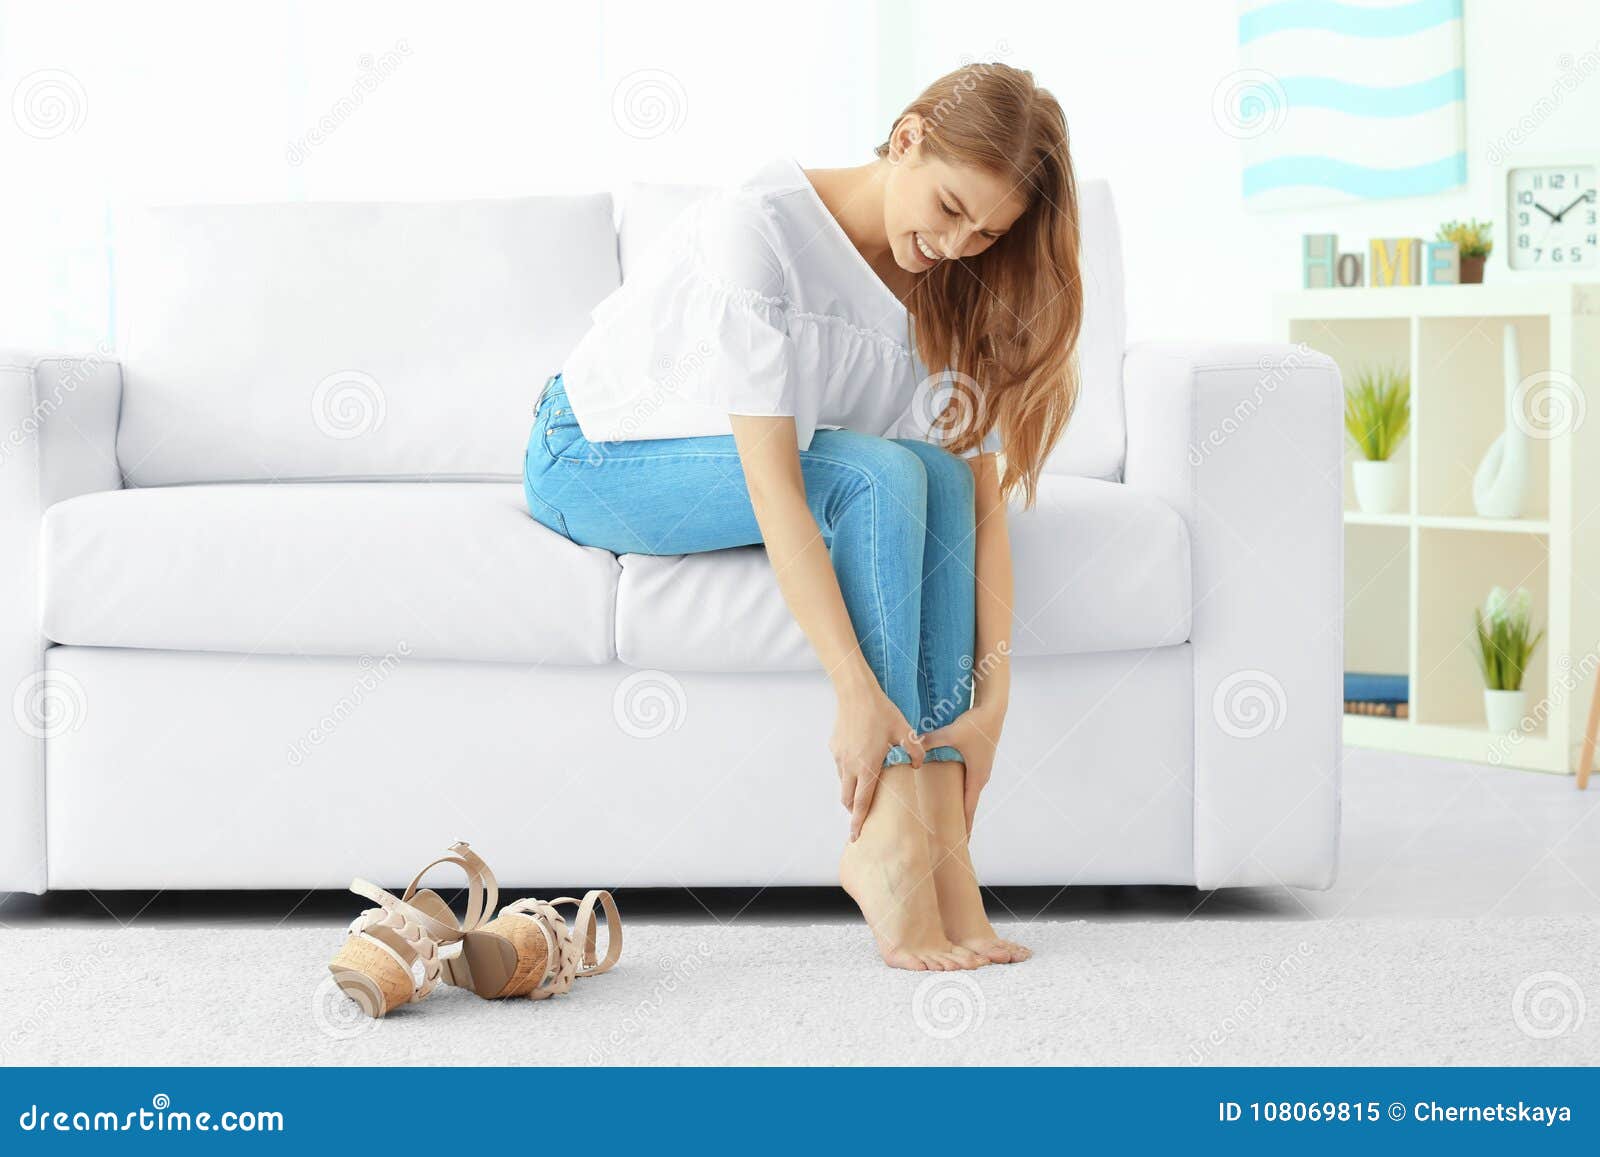 Young Woman  sorrowful From Leg  sore spot  accretion Image - Image of  